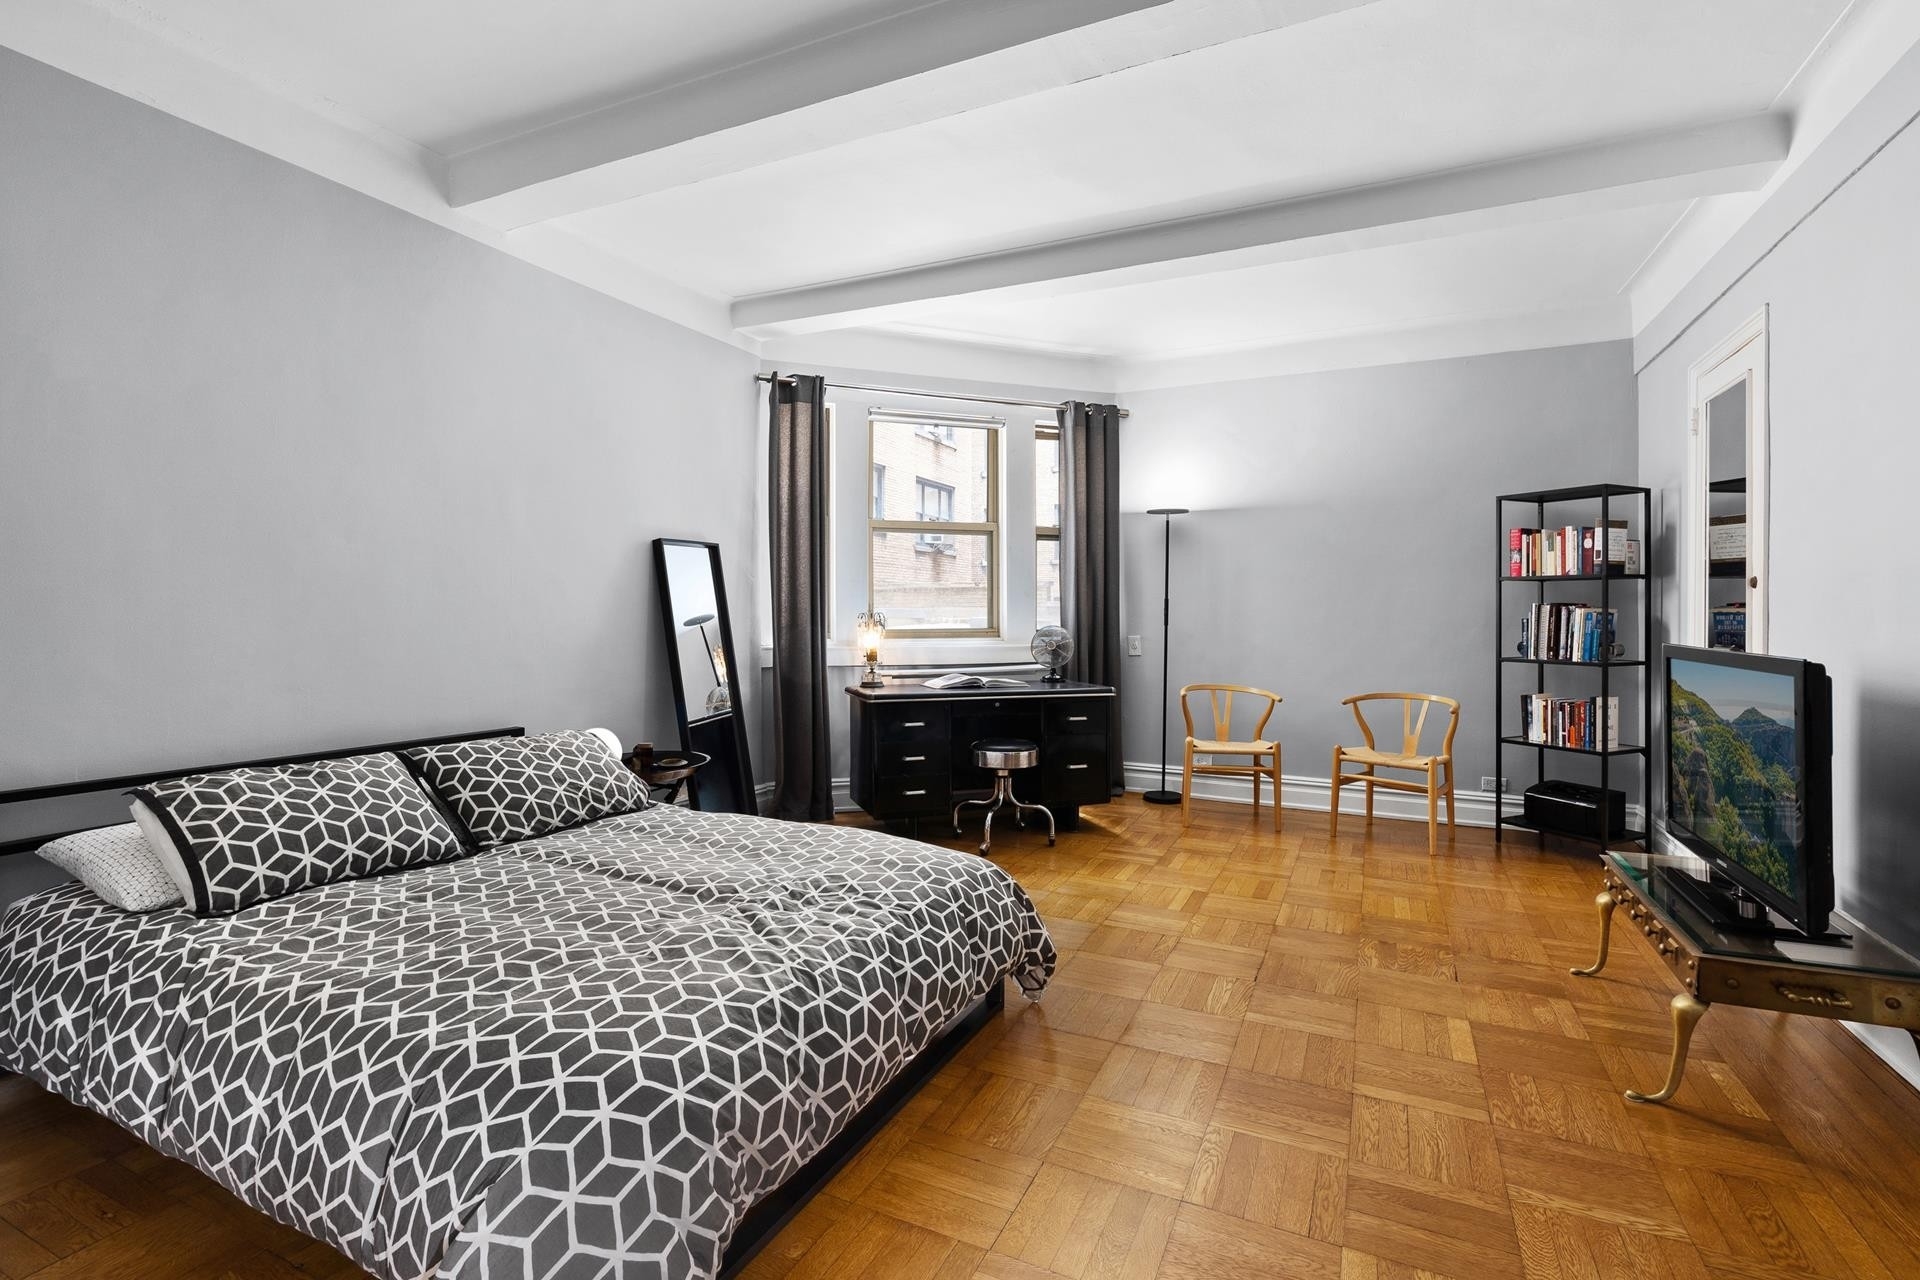 Co-op Properties for Sale at 24 FIFTH AVE, 219 Greenwich Village, New York, NY 10011